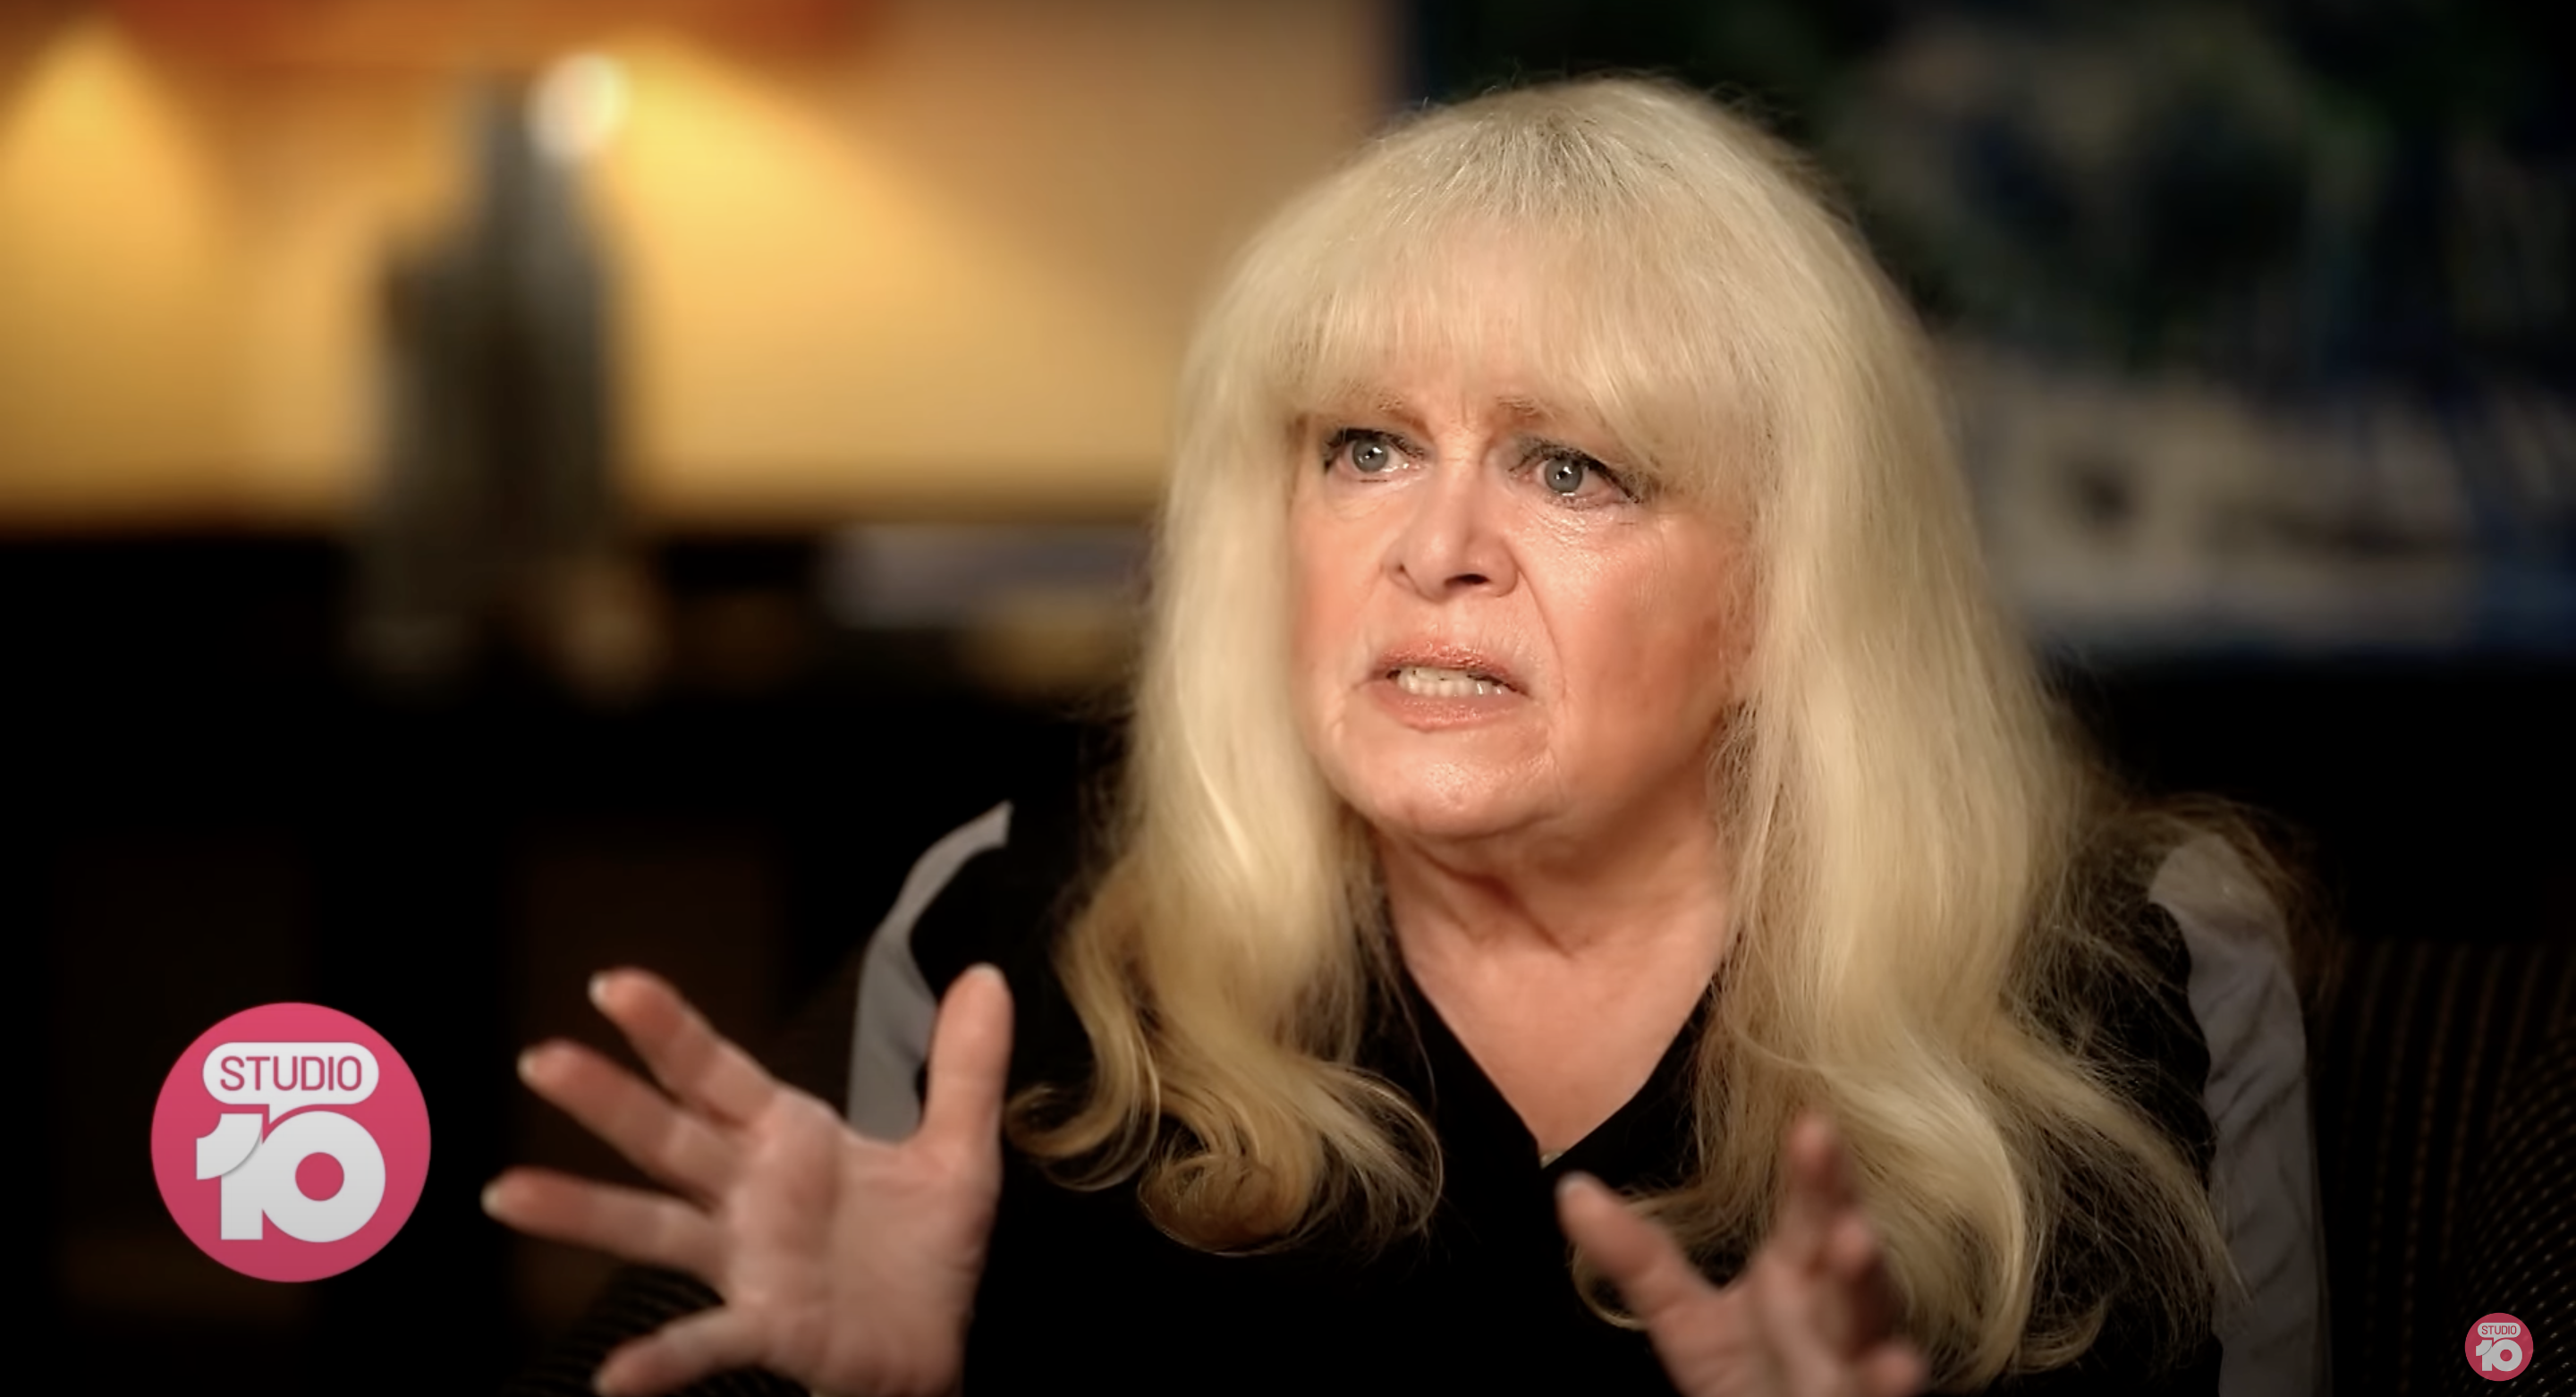 Sally Struthers during her recent interview for Studio 10 | Source: Youtube / Studio 10